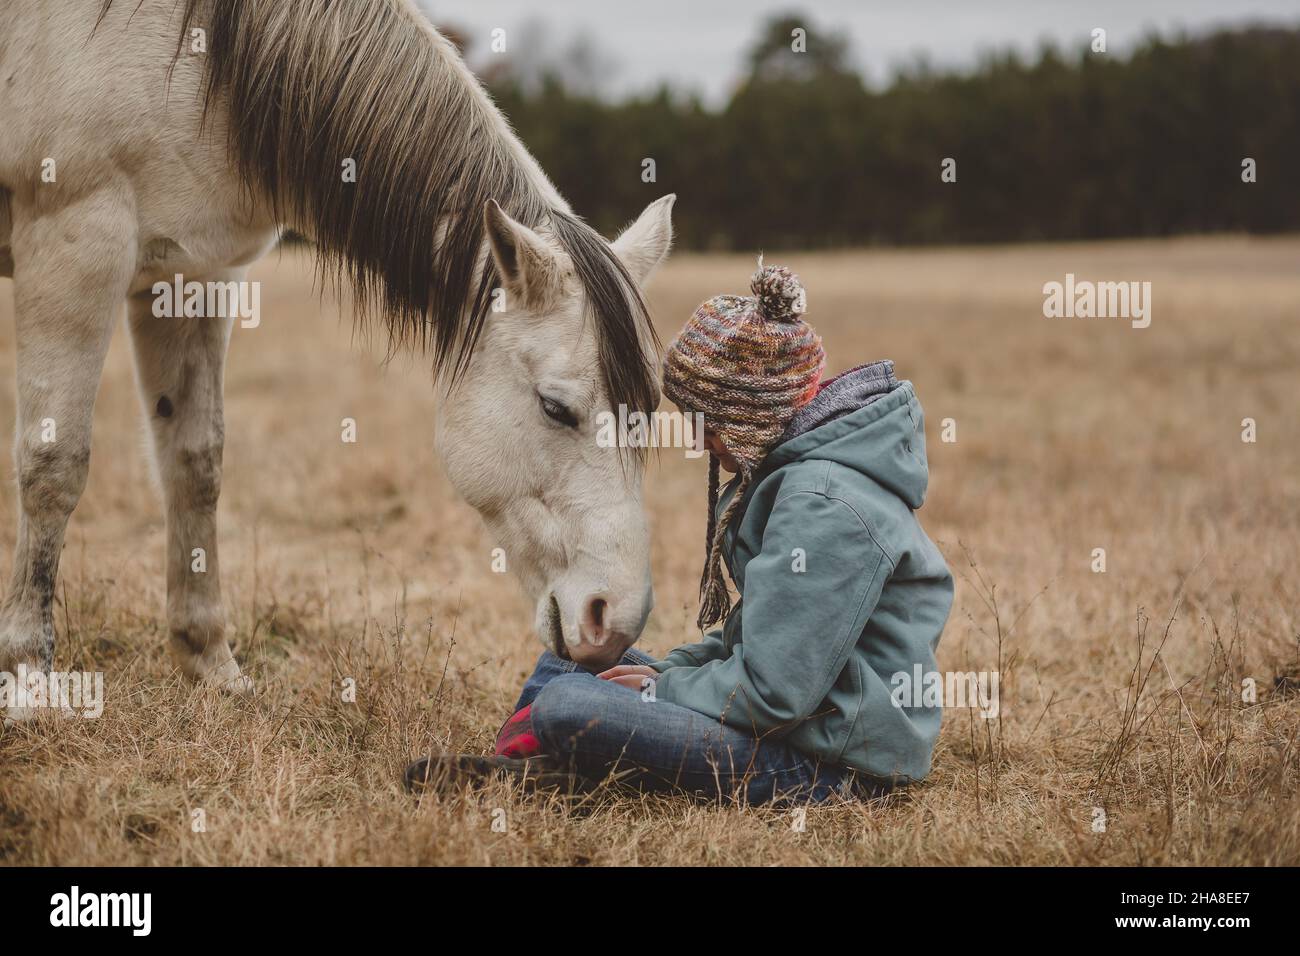 Horse smelling teen girls hands Stock Photo